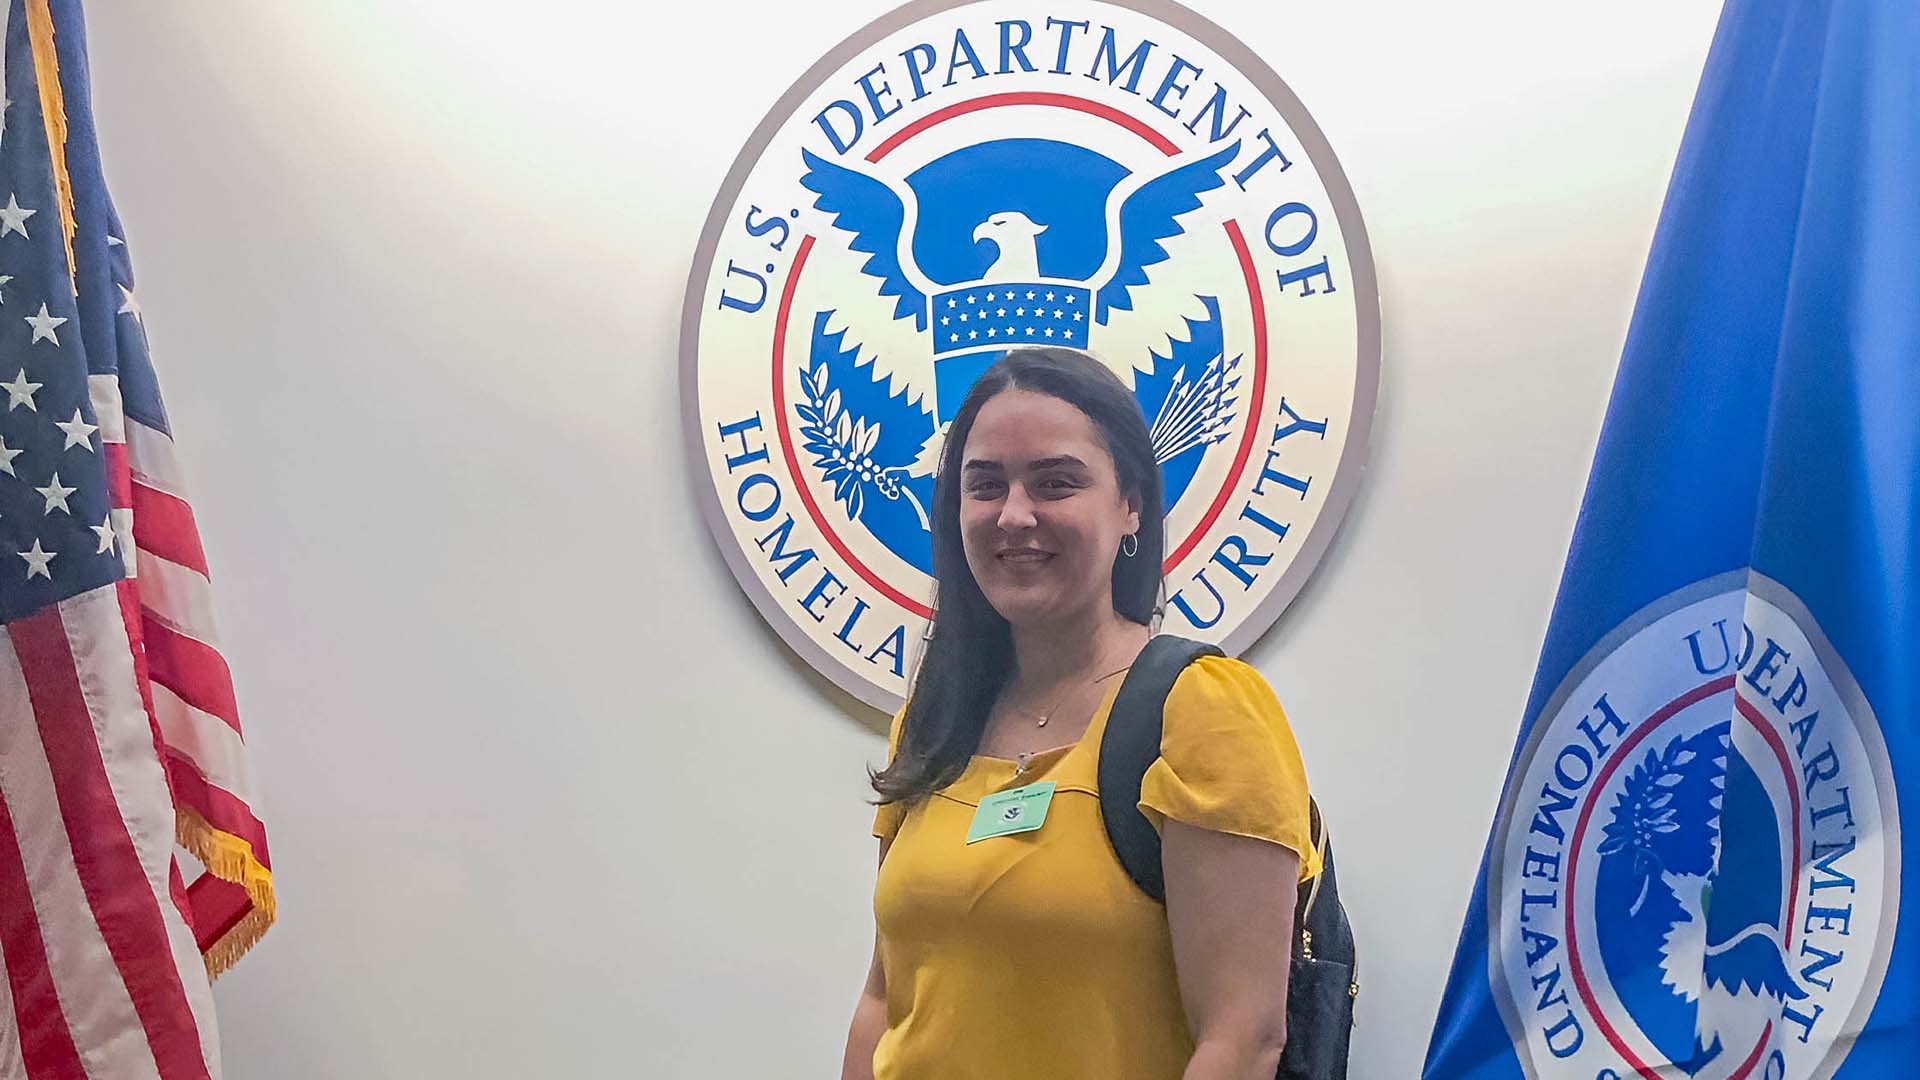 JWU student Jazmin Pacheco standing in front of US Department of Homeland Security logo